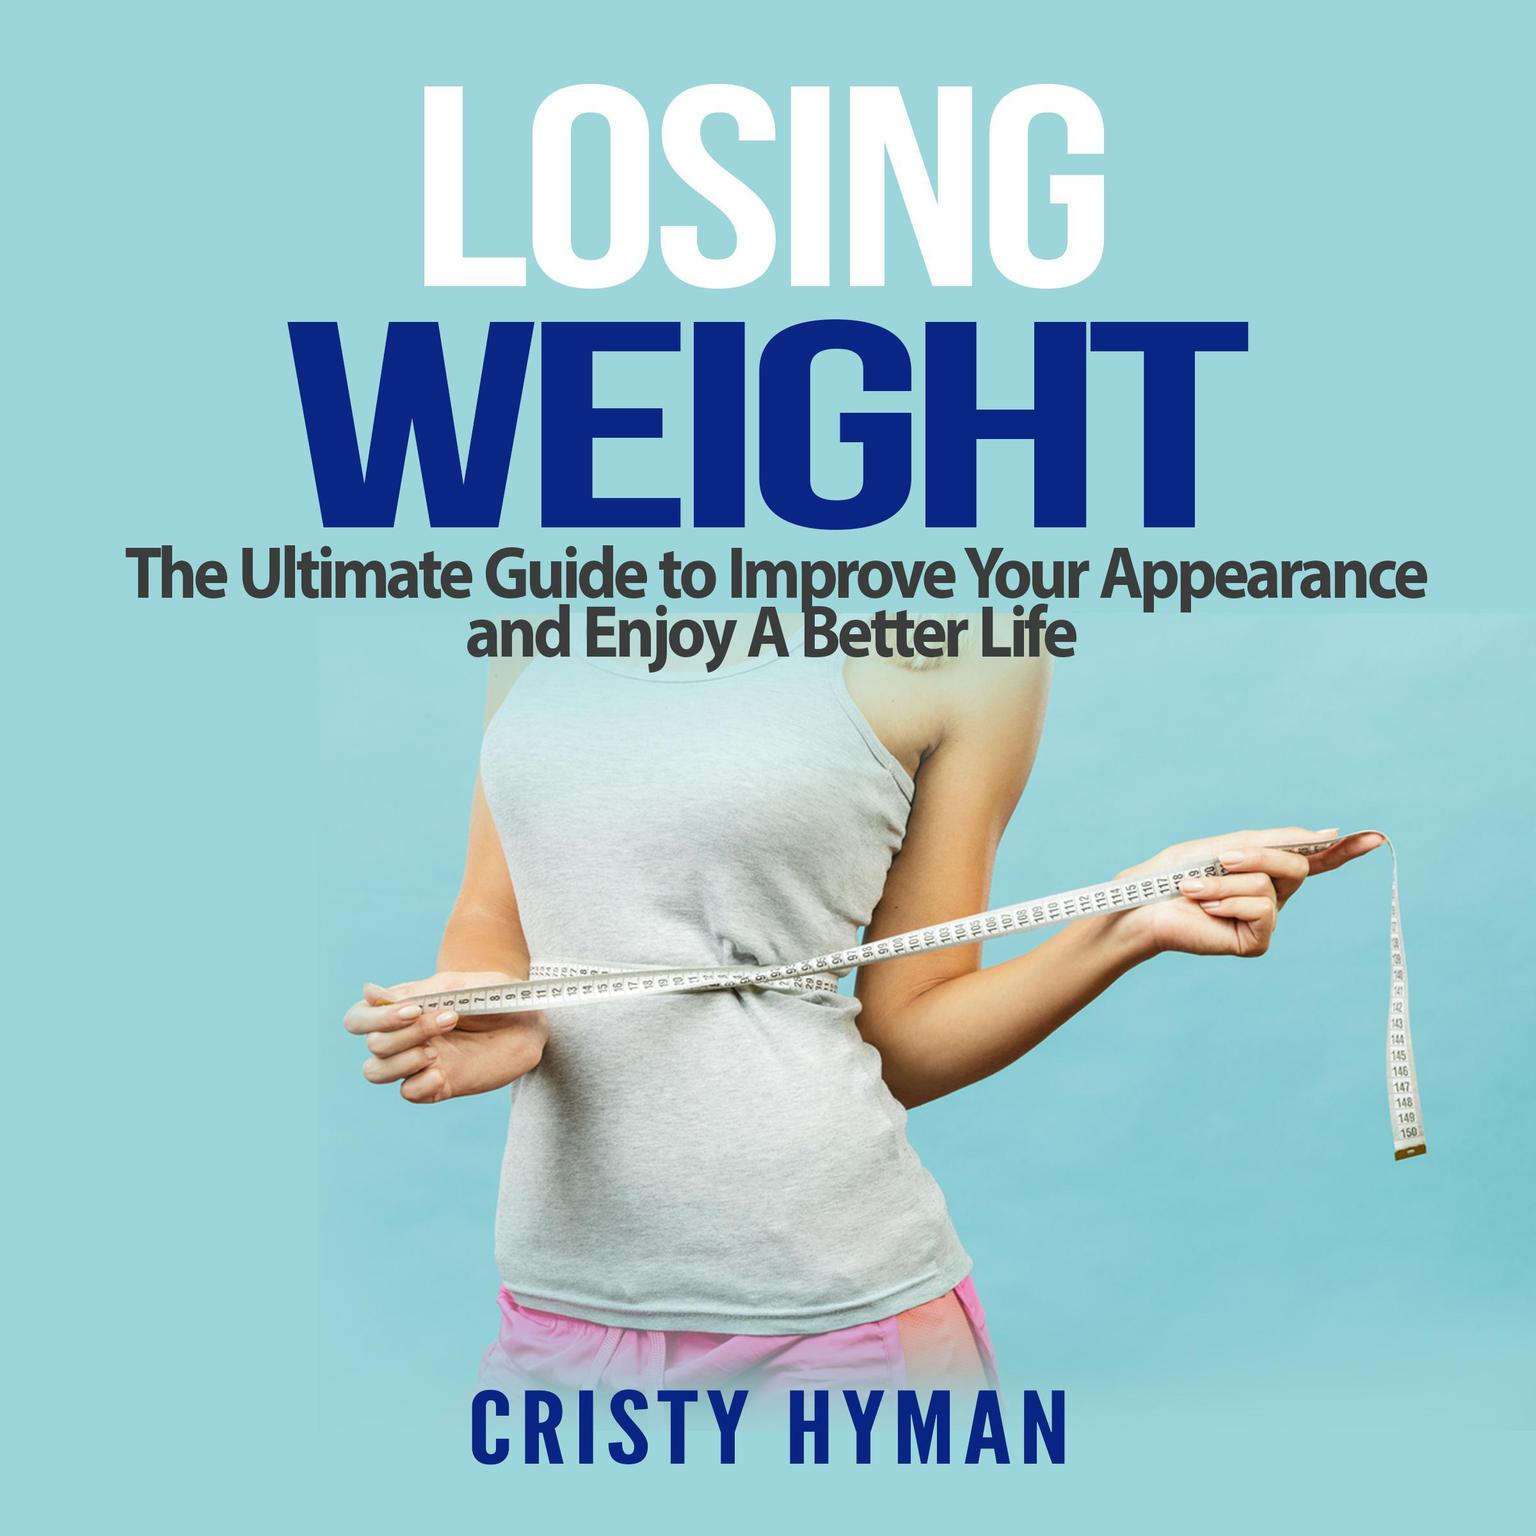 Losing Weight: The Ultimate Guide to Improve Your Appearance and Enjoy A Better Life Audiobook, by Cristy Hyman